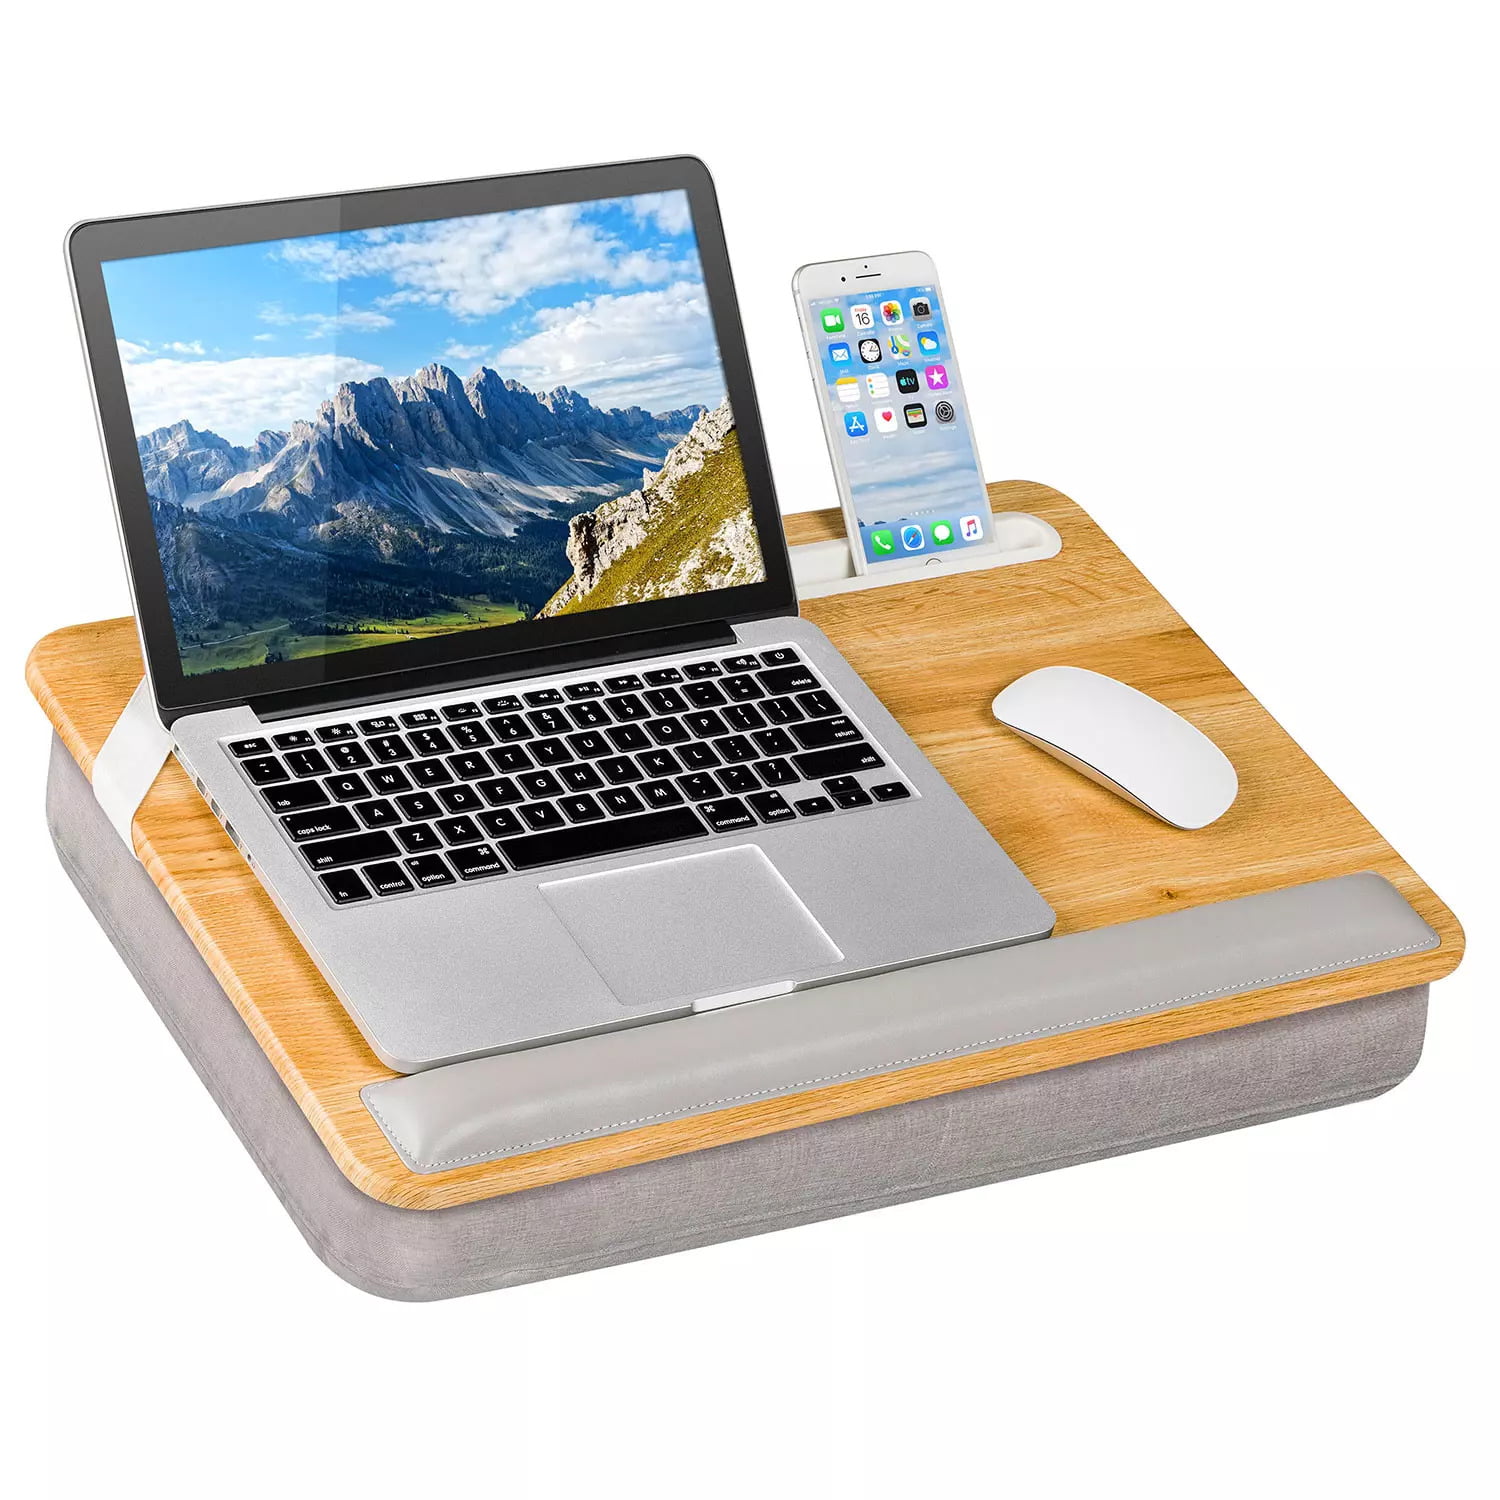 LapGear Home Office Lap Desk with Device Ledge, Mouse Pad, and 